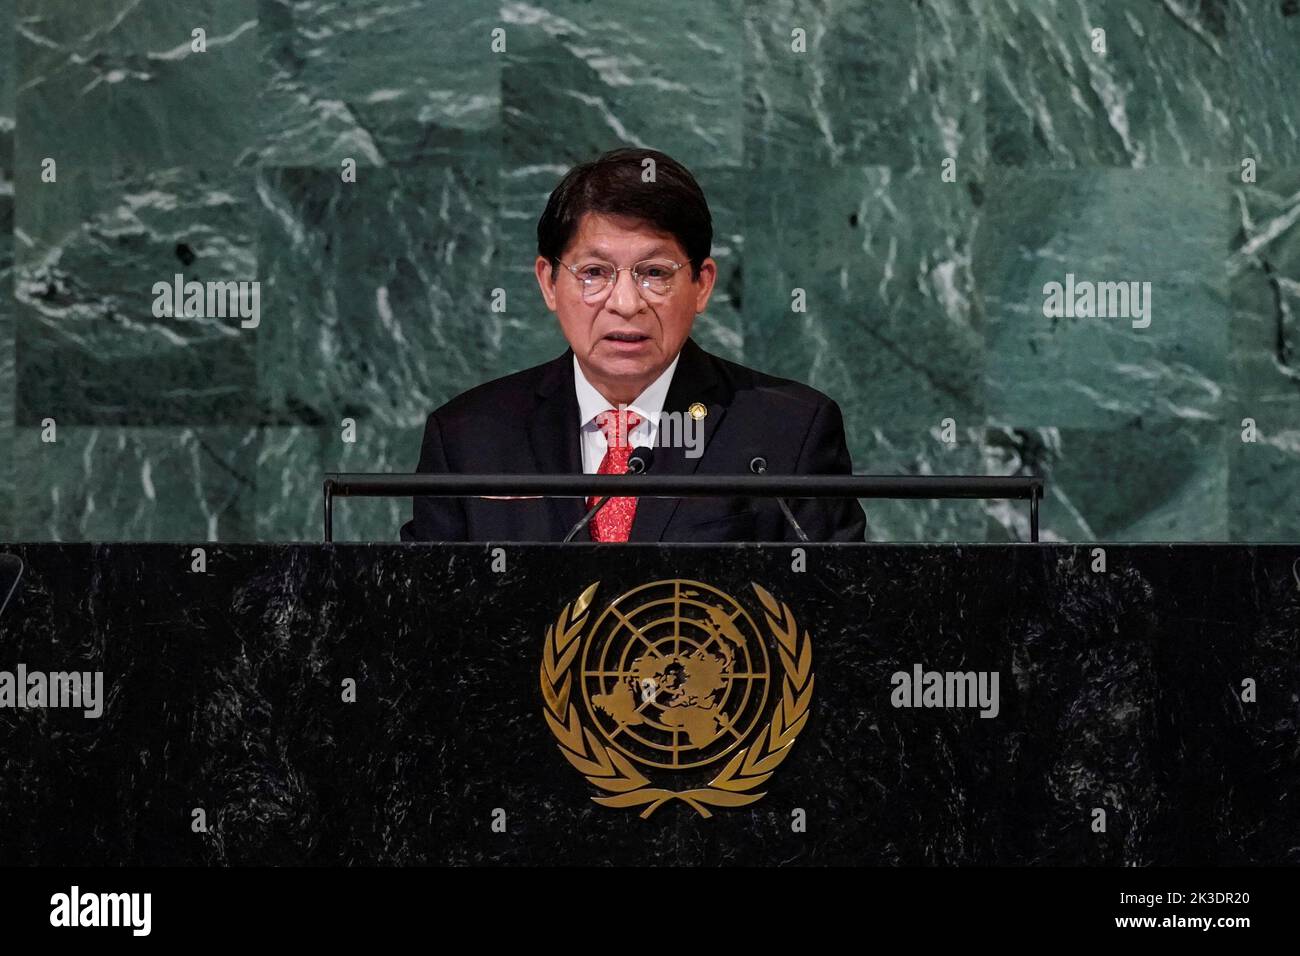 Nicaraguan Foreign Minister Denis Moncada Colindres addresses the 77th Session of the United Nations General Assembly at U.N. Headquarters in New York City, U.S., September 26, 2022. REUTERS/Eduardo Munoz Stock Photo